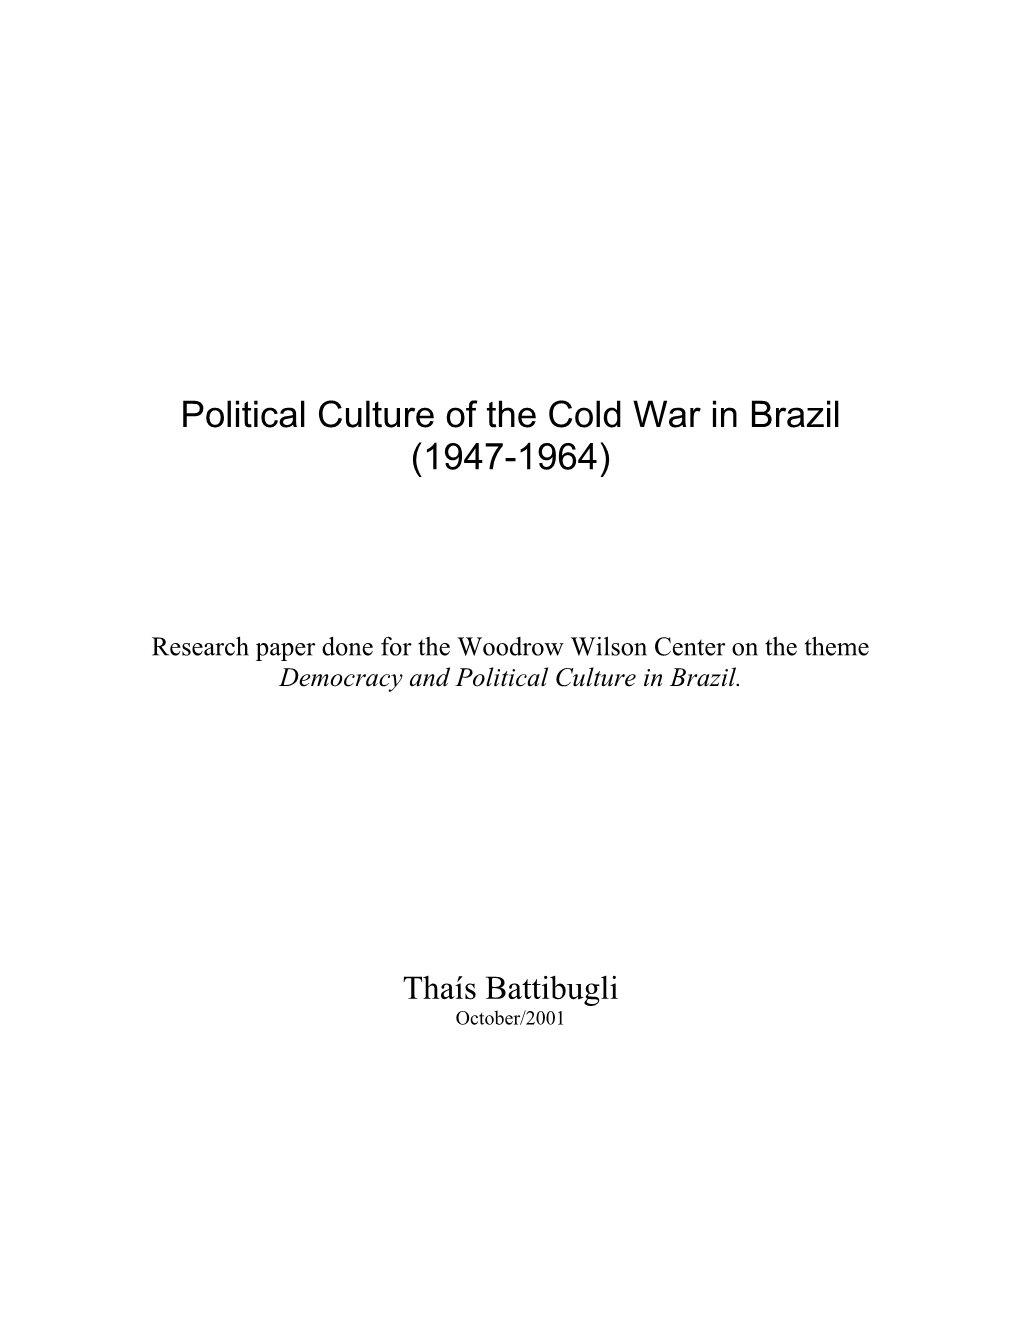 Political Culture of the Cold War in Brazil (1947-1964)